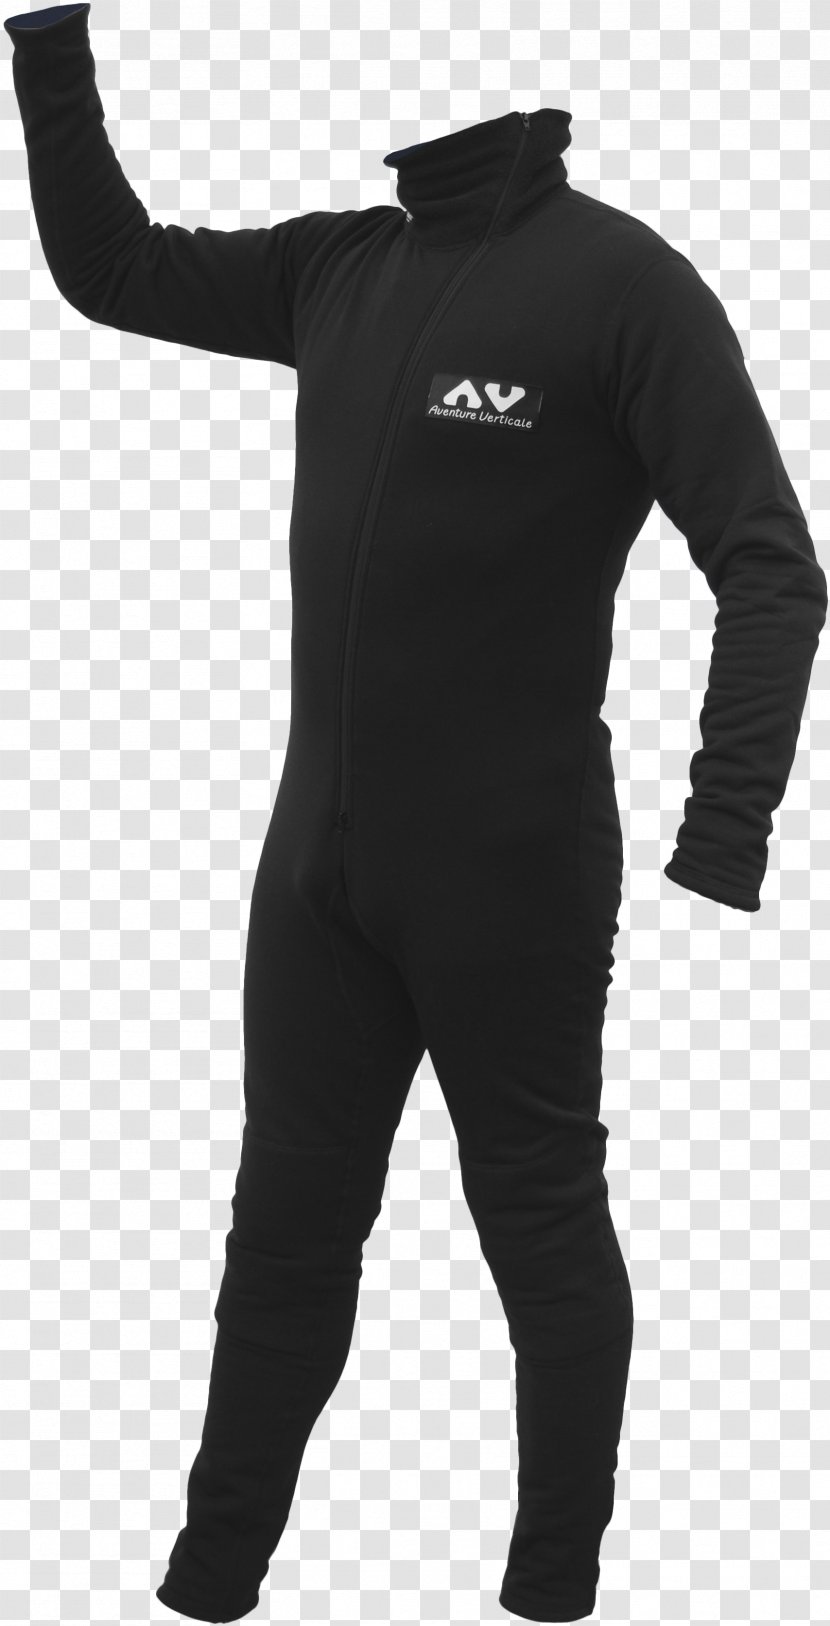 Wetsuit Caving Speleology Canyoning Ascender - Suit - Rope Transparent PNG